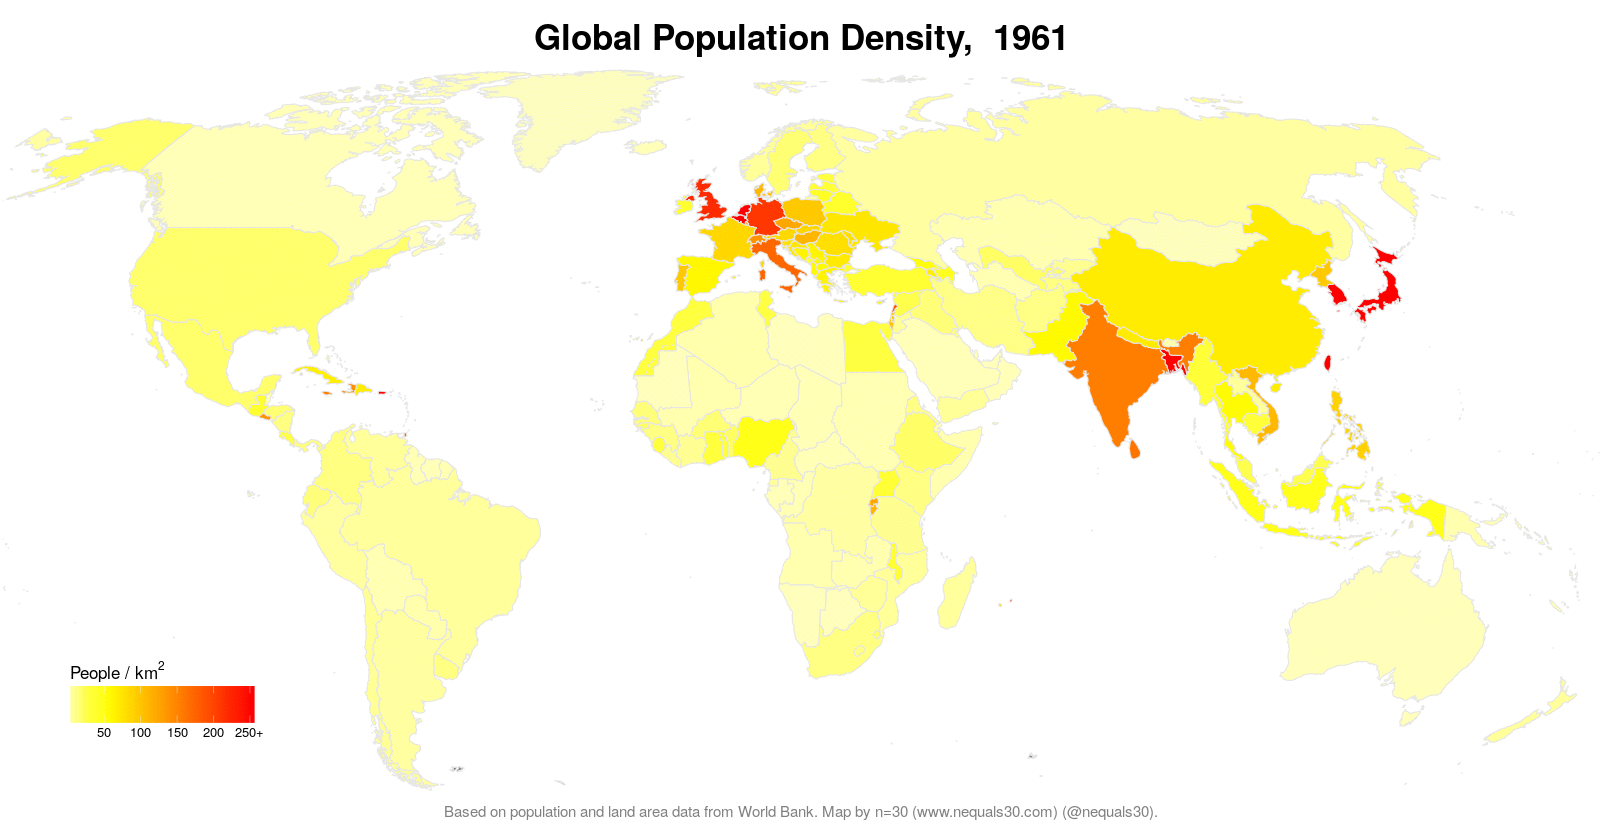 A GIF of Population Density